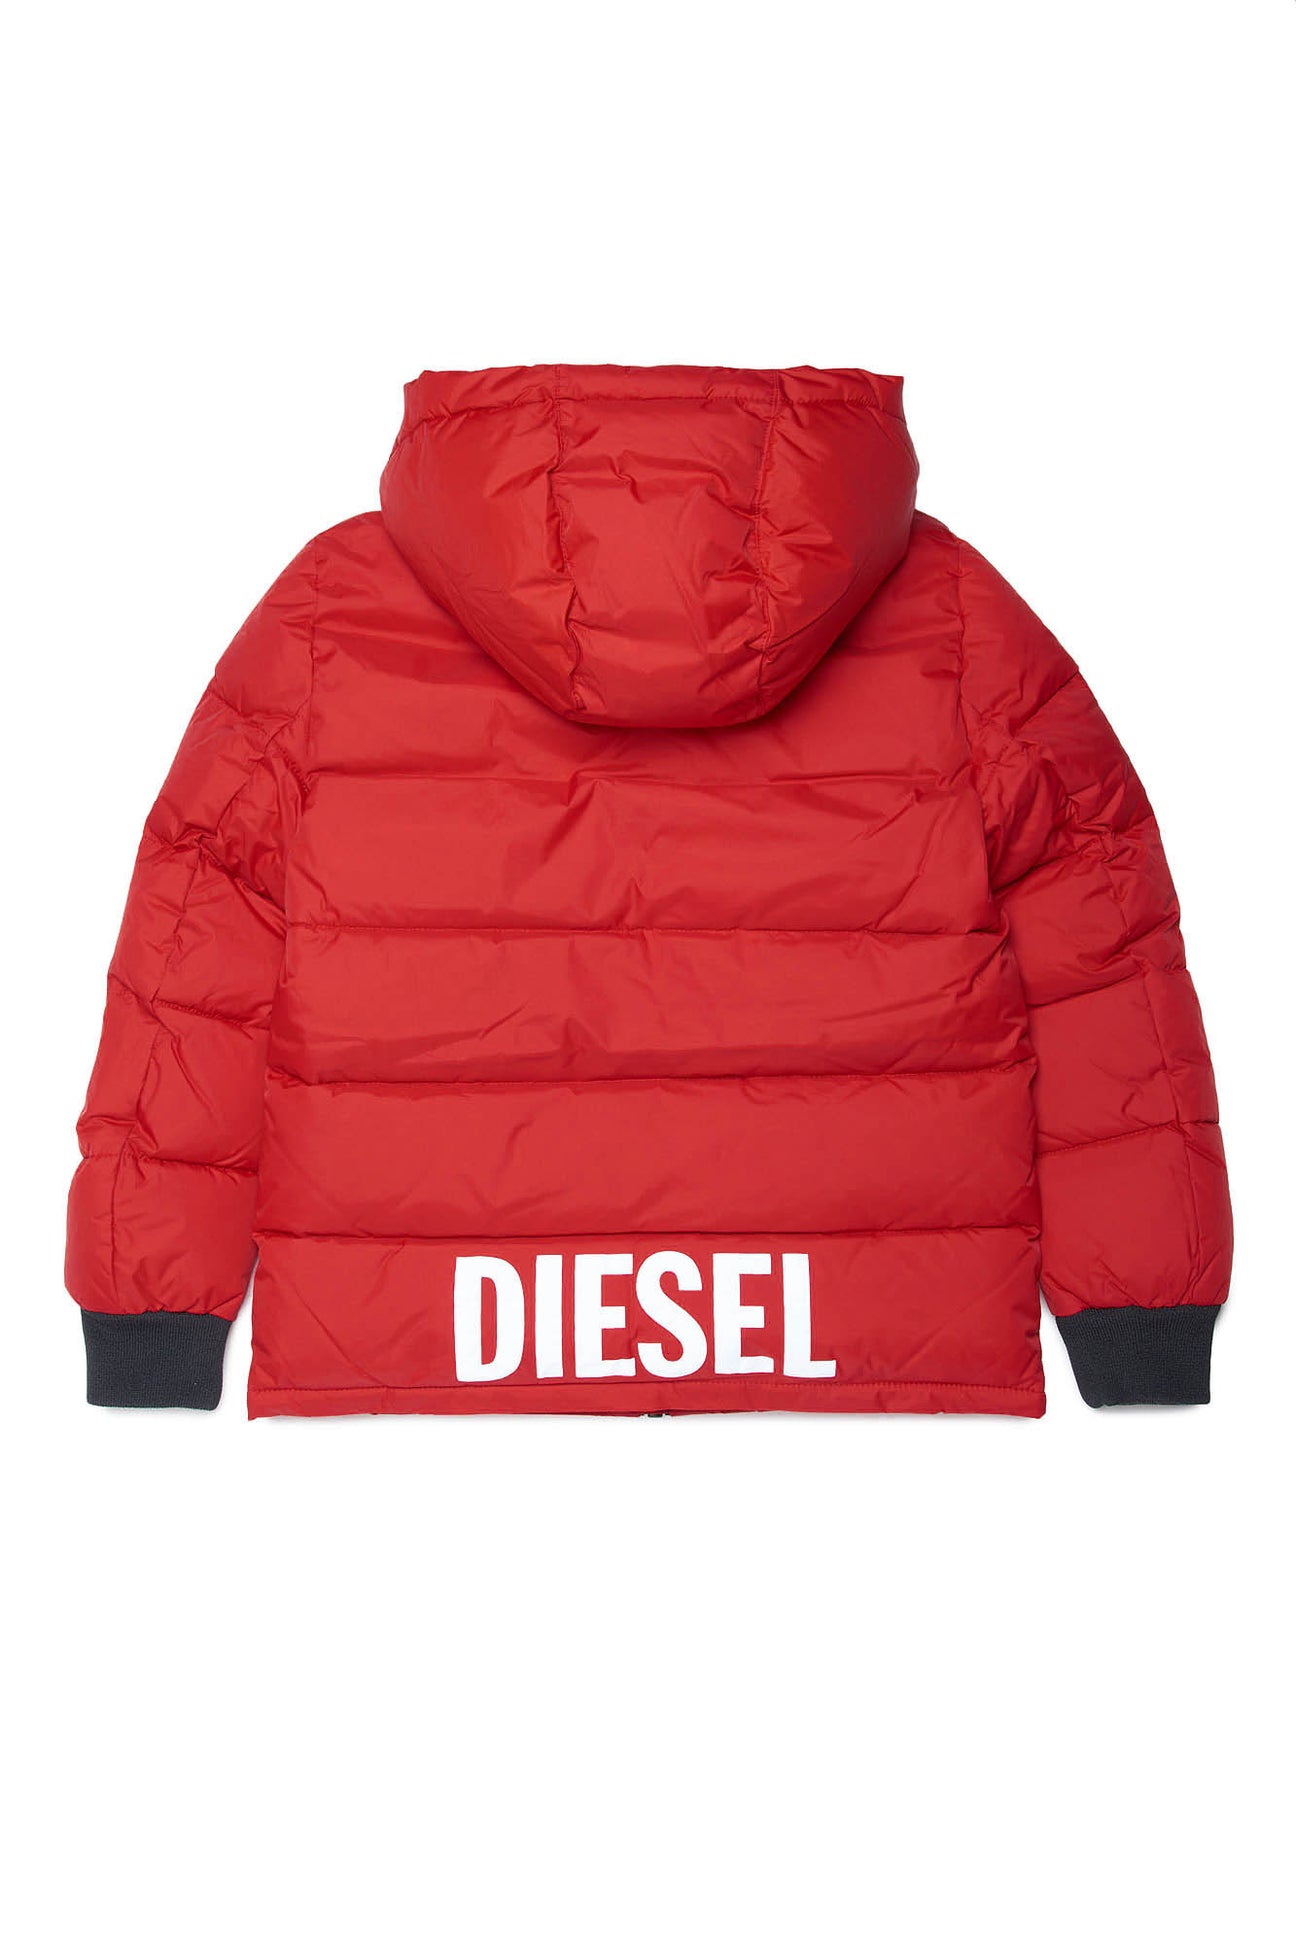 Red down jacket with Diesel logo on the back Red down jacket with Diesel logo on the back